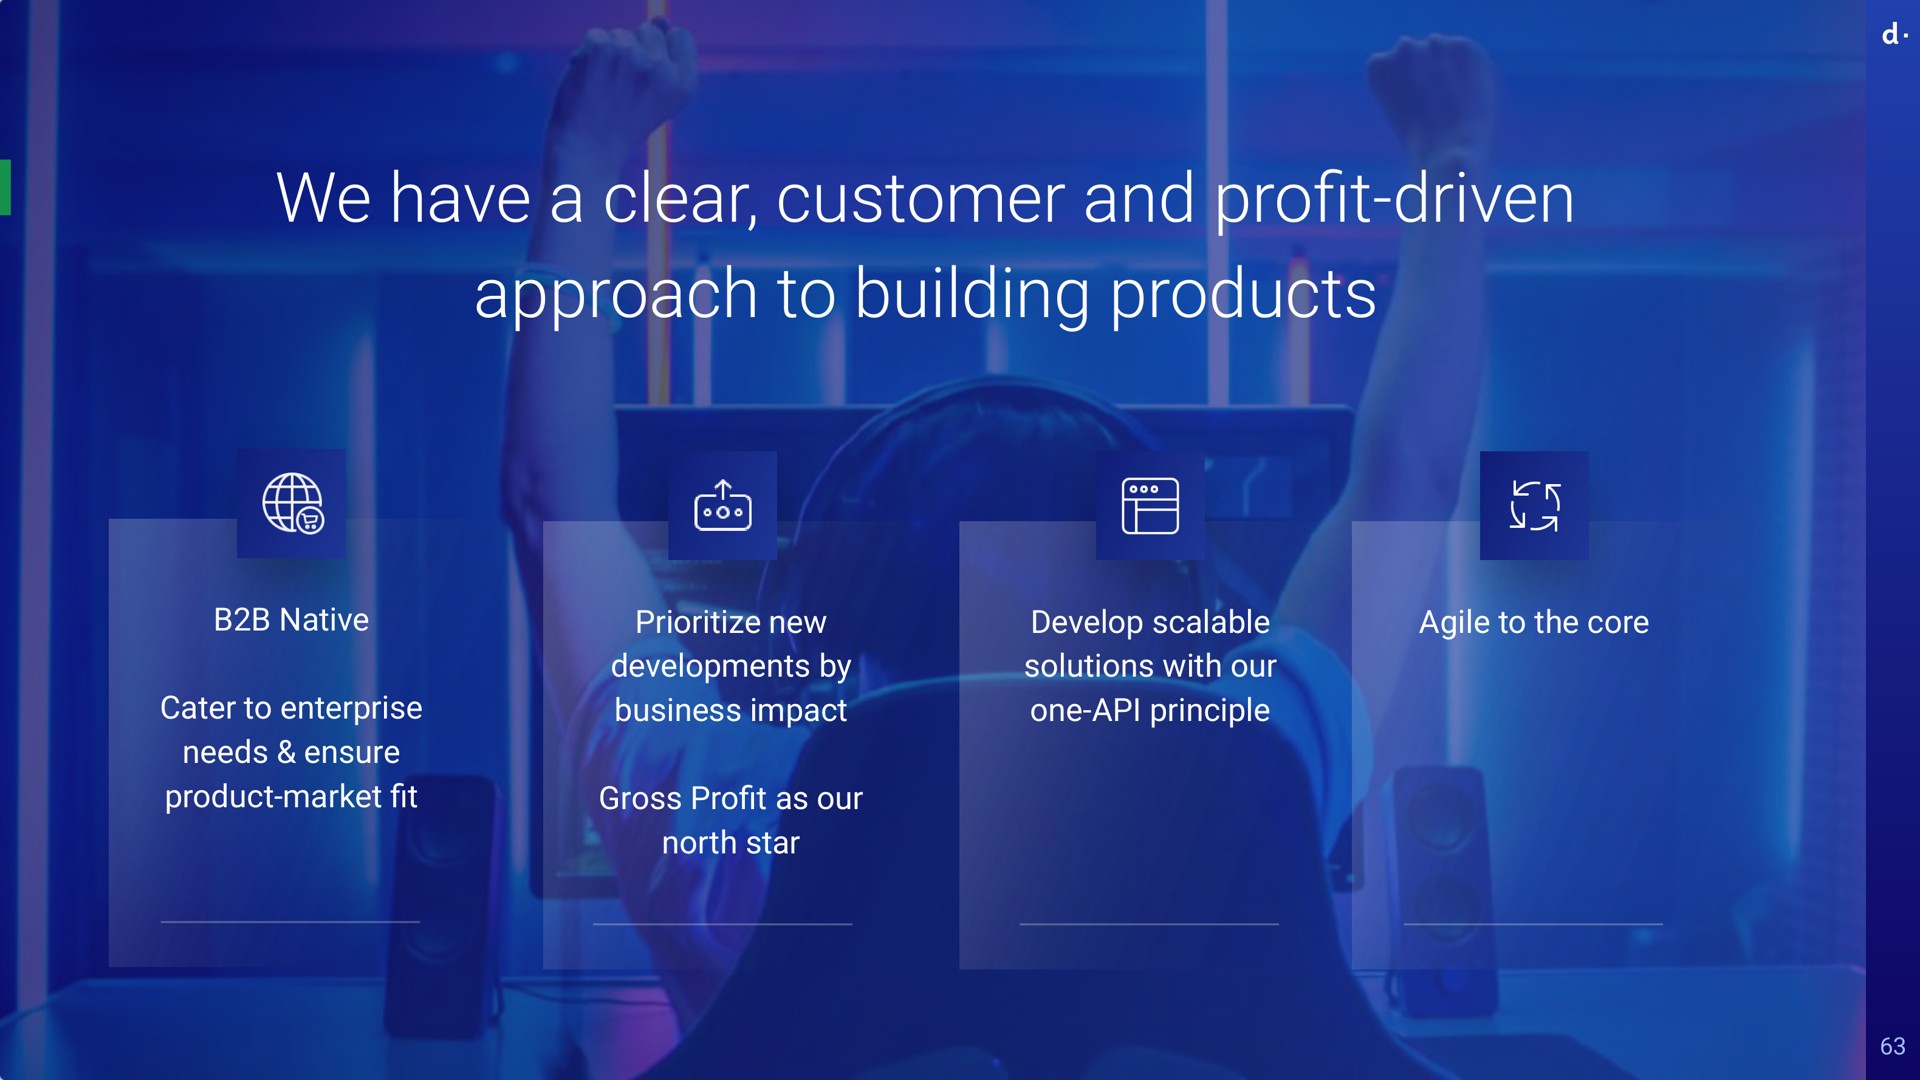 we have a clear customer and pro driven approach to building products native cater to enterprise needs ensure product market new developments by business impact gross pro as our north star develop scalable solutions with our one principle agile to the core profit driven fit lis dom aln profit | dLocal